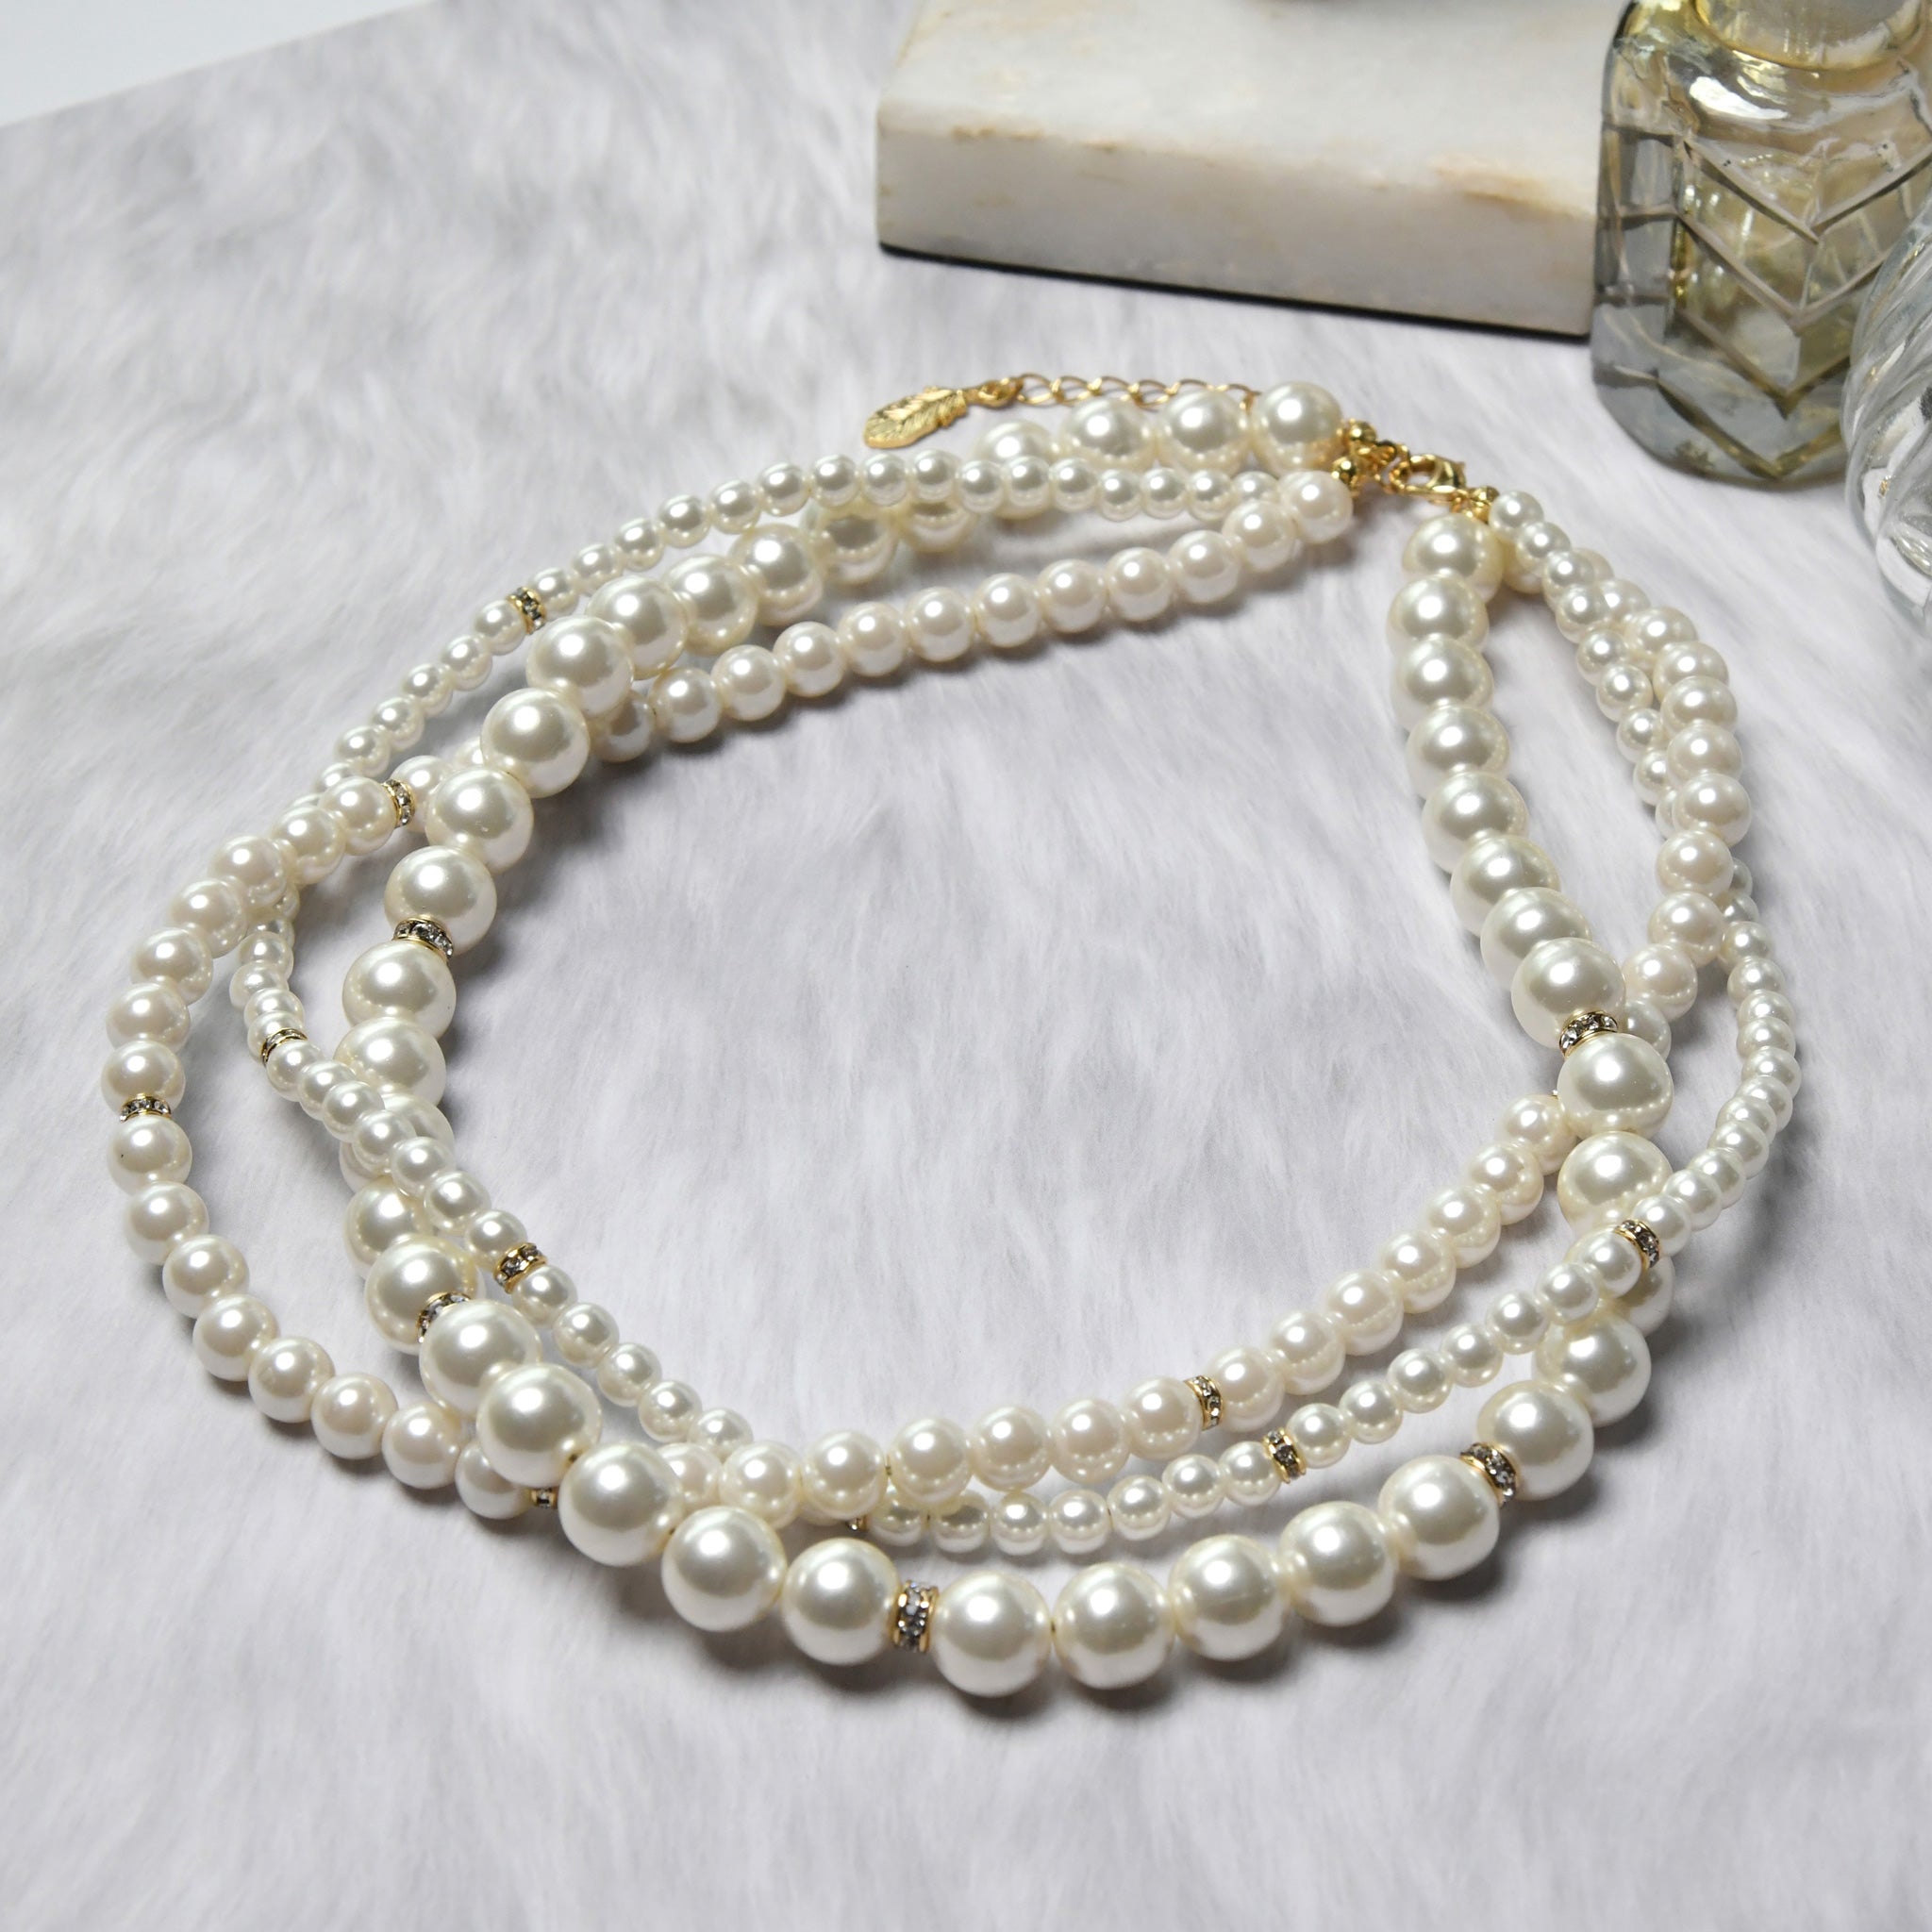 3 pearl volume necklace